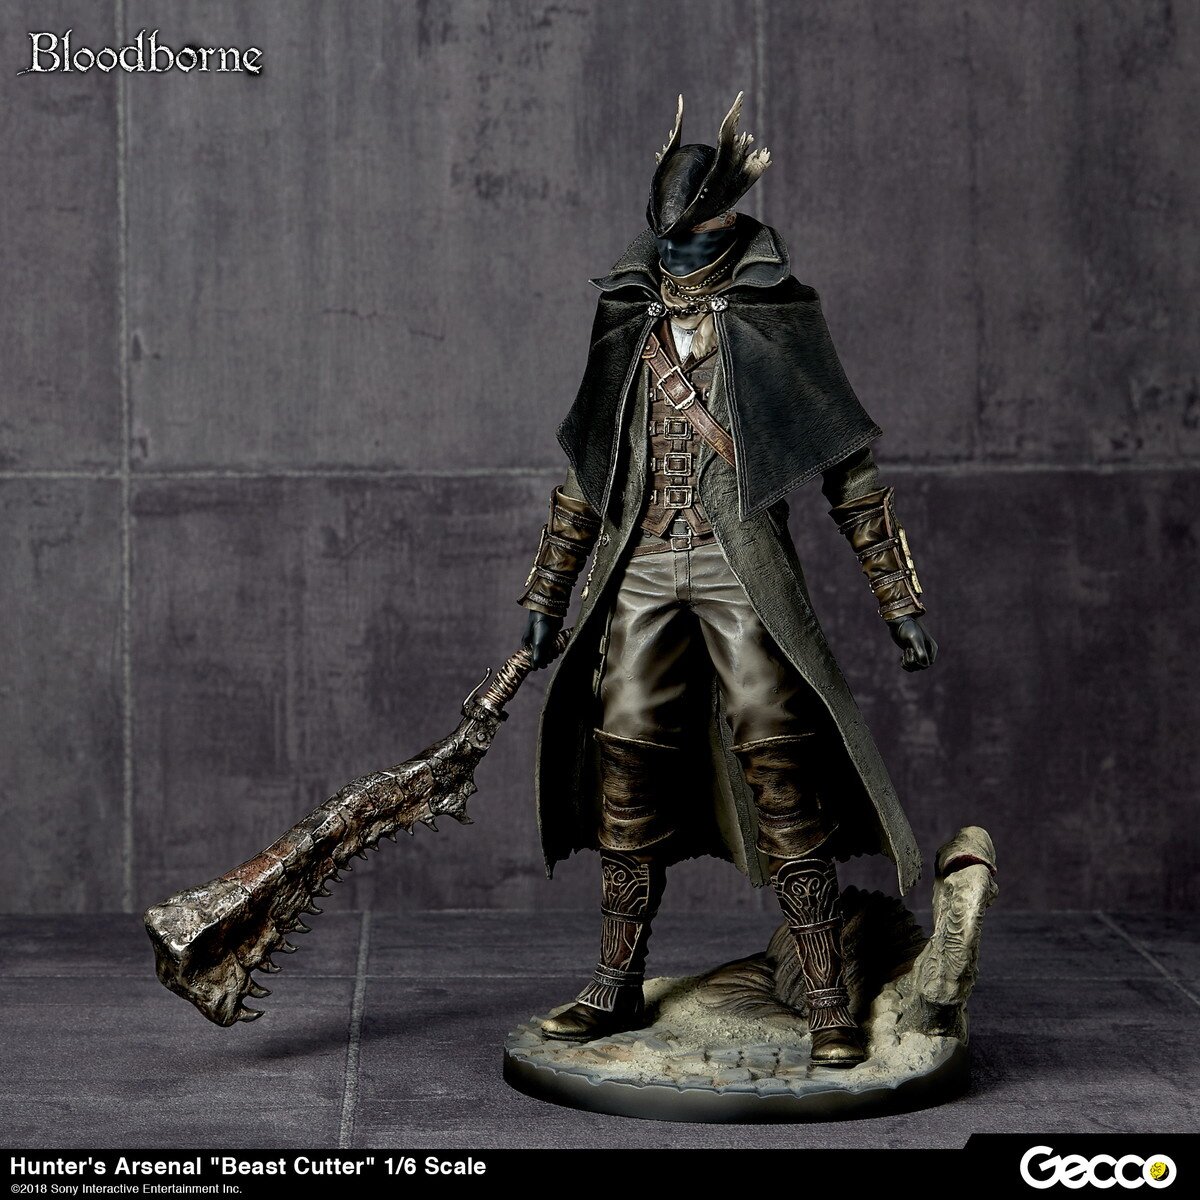 Bloodborne Hunter's Arsenal Beast Cutter 1/6 Scale Weapon: Gecco ...